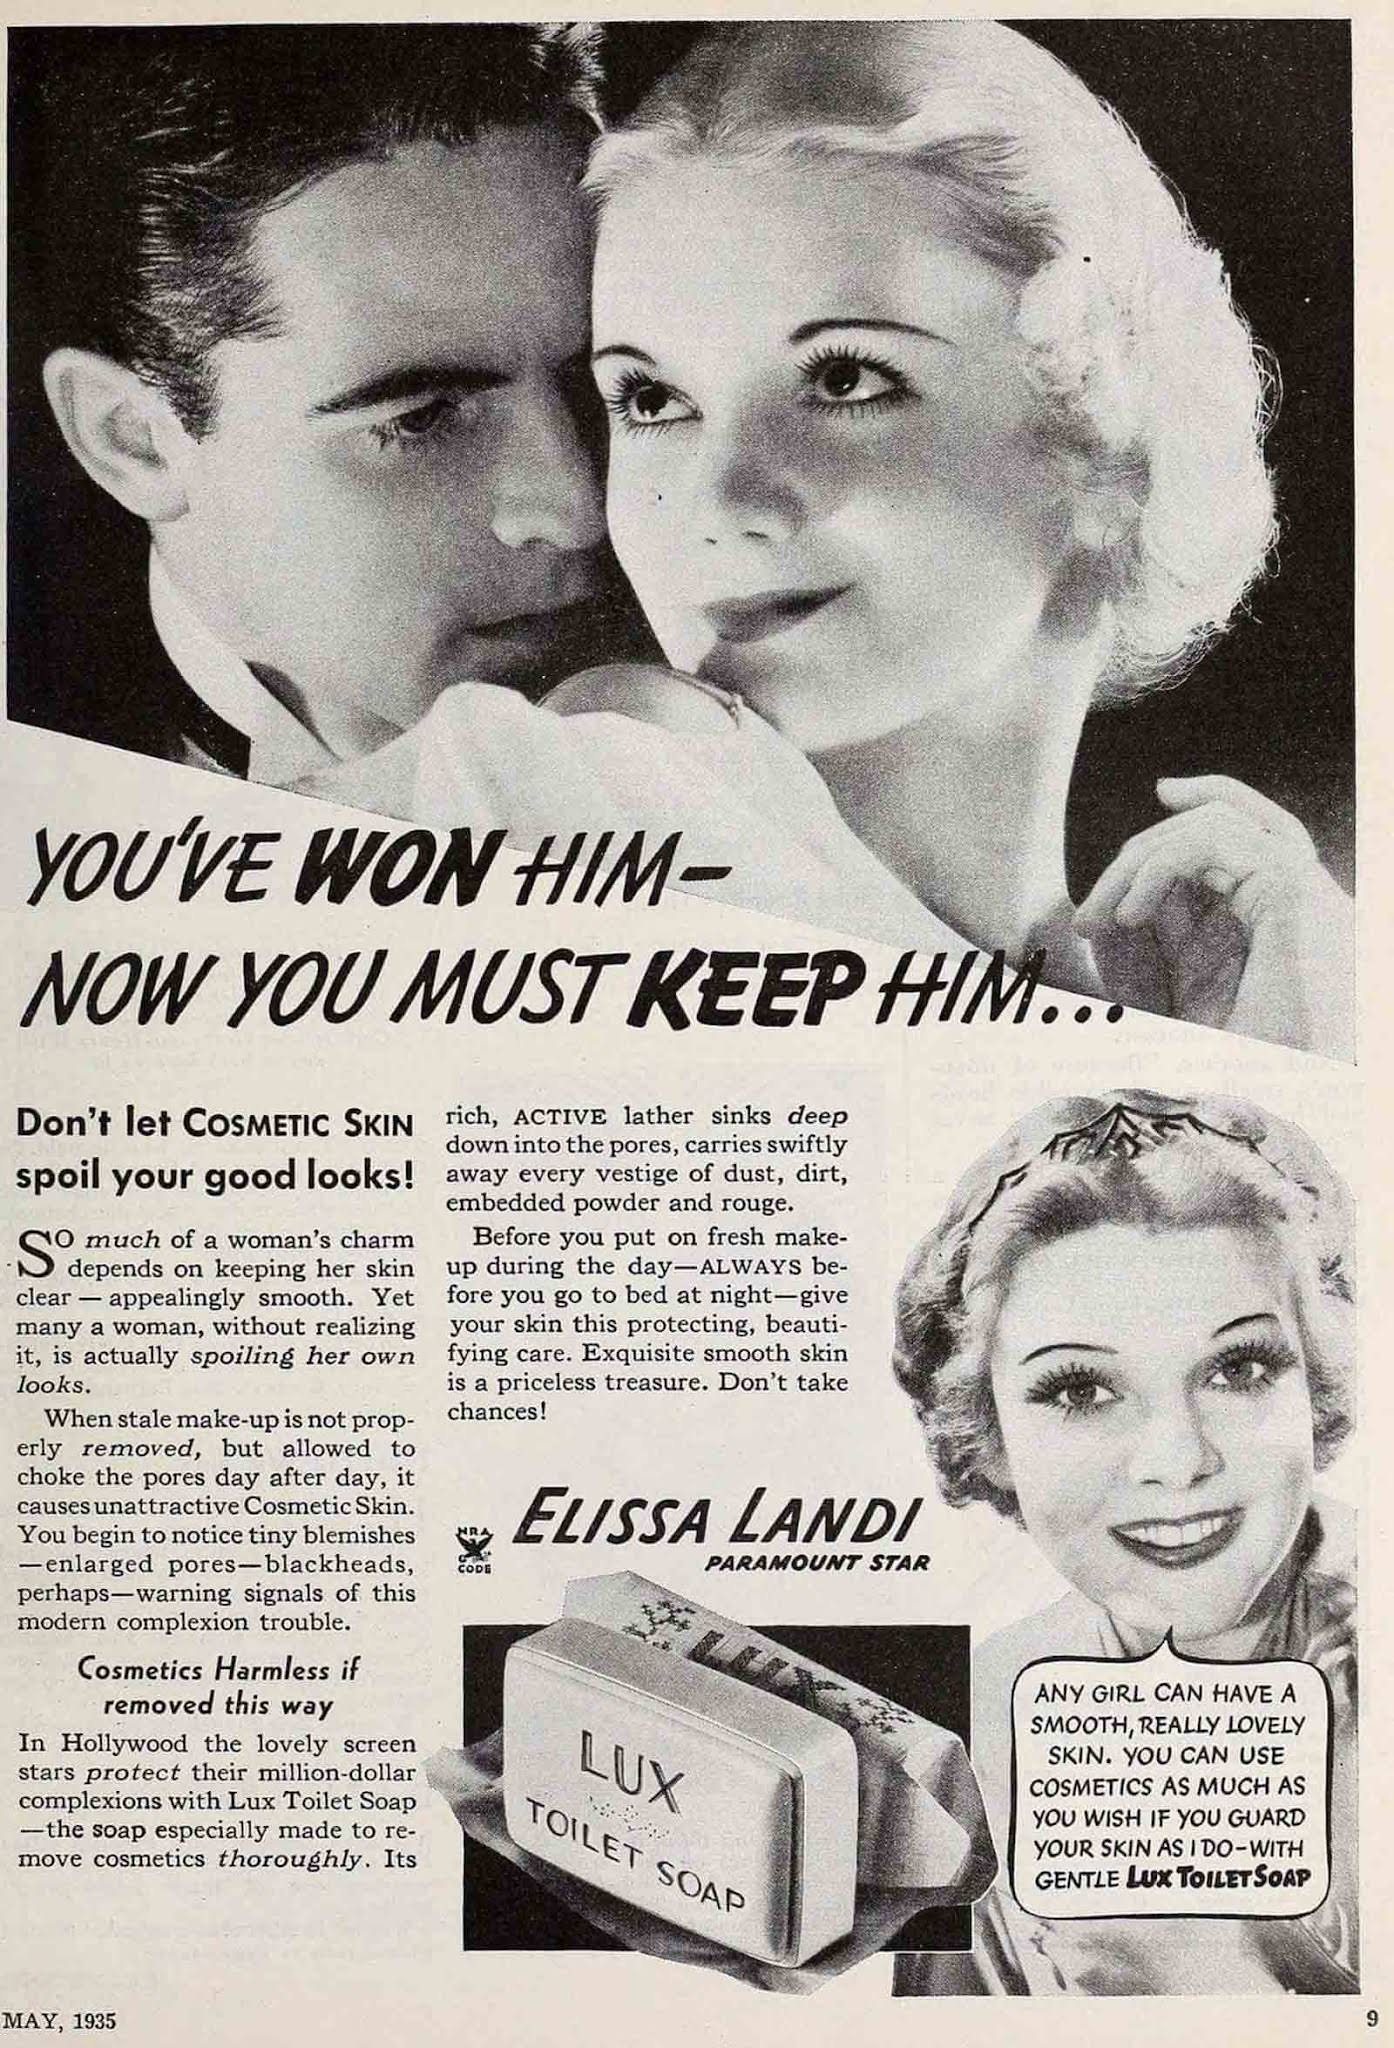 You won him – now you must keep him. 1935.